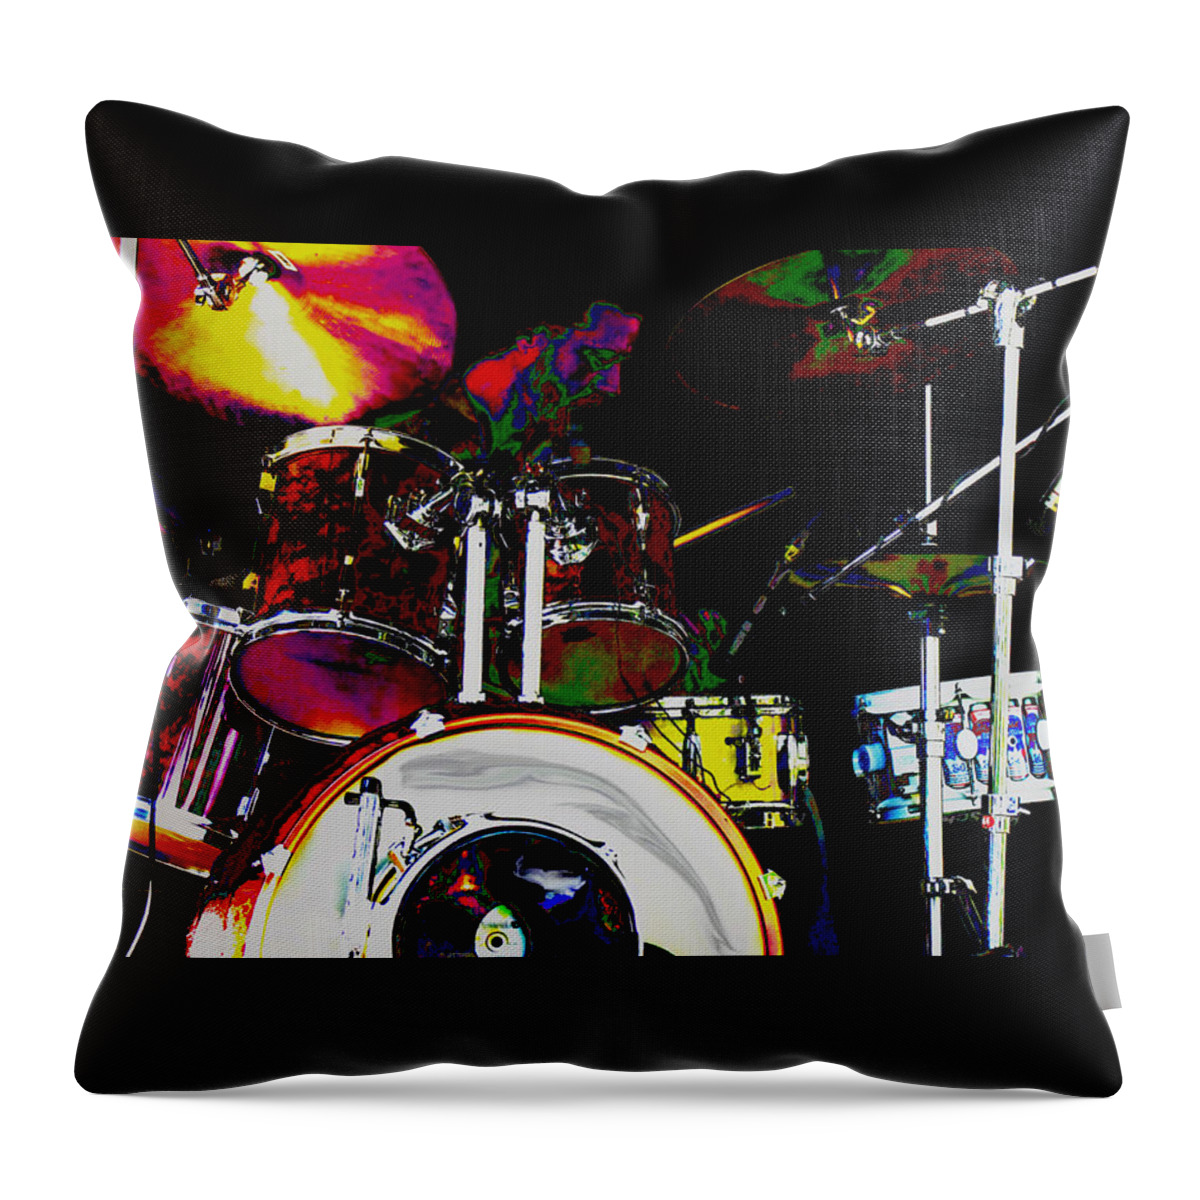 Drum Set And Drummer Throw Pillow featuring the photograph Hot Licks Drummer by Kae Cheatham